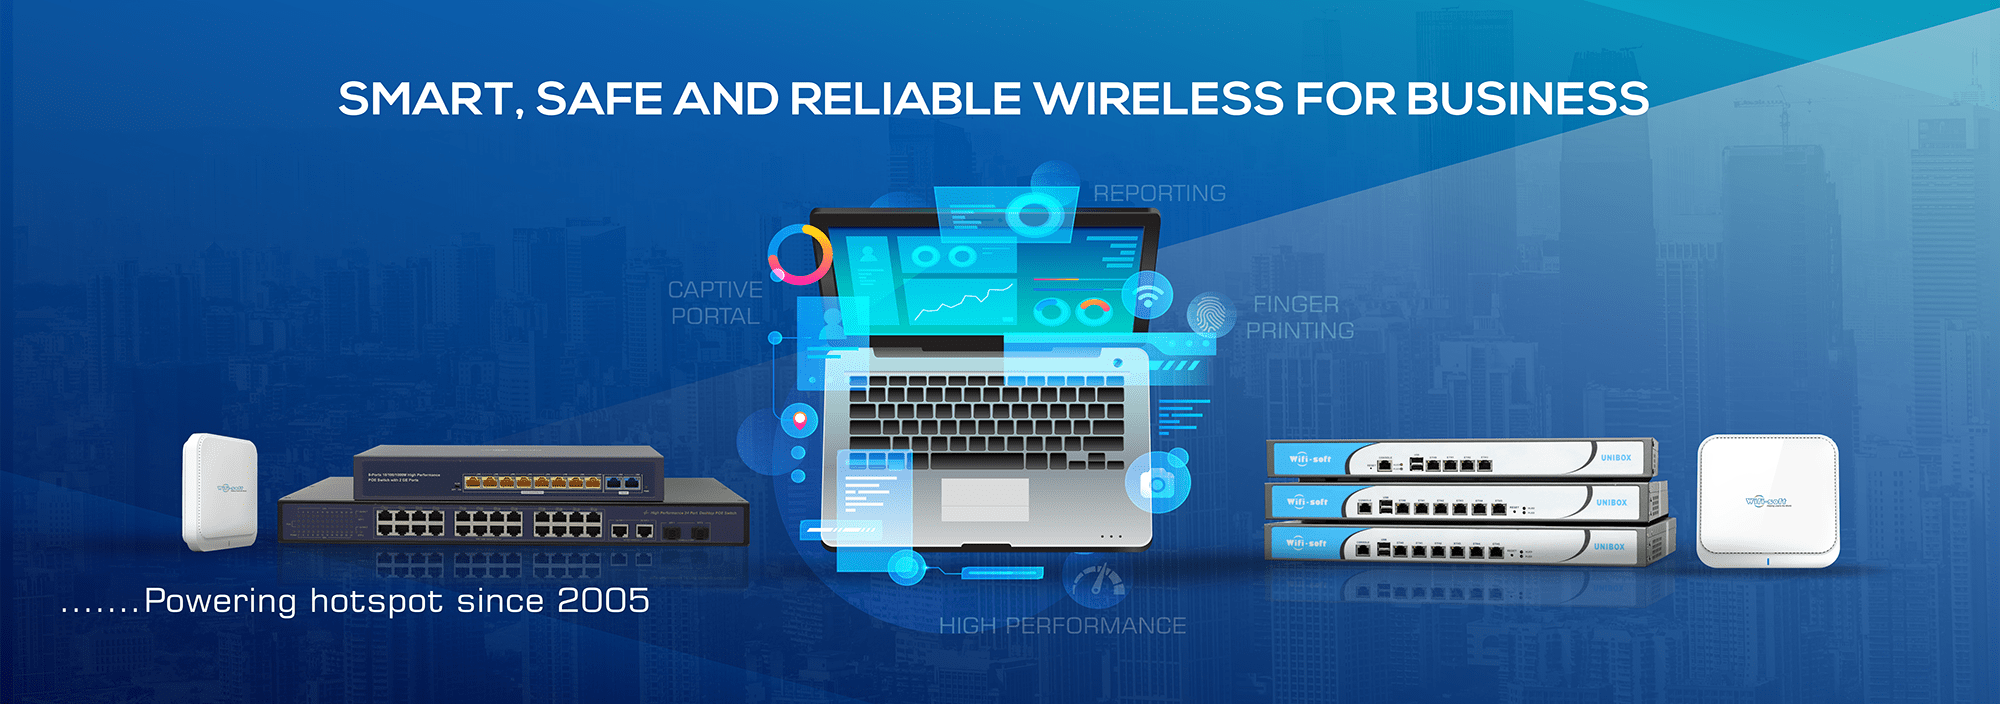 Enterprise Wi-Fi Solutions, Network Access Controllers,  Access Points, PoE Switches - Wifi-Soft